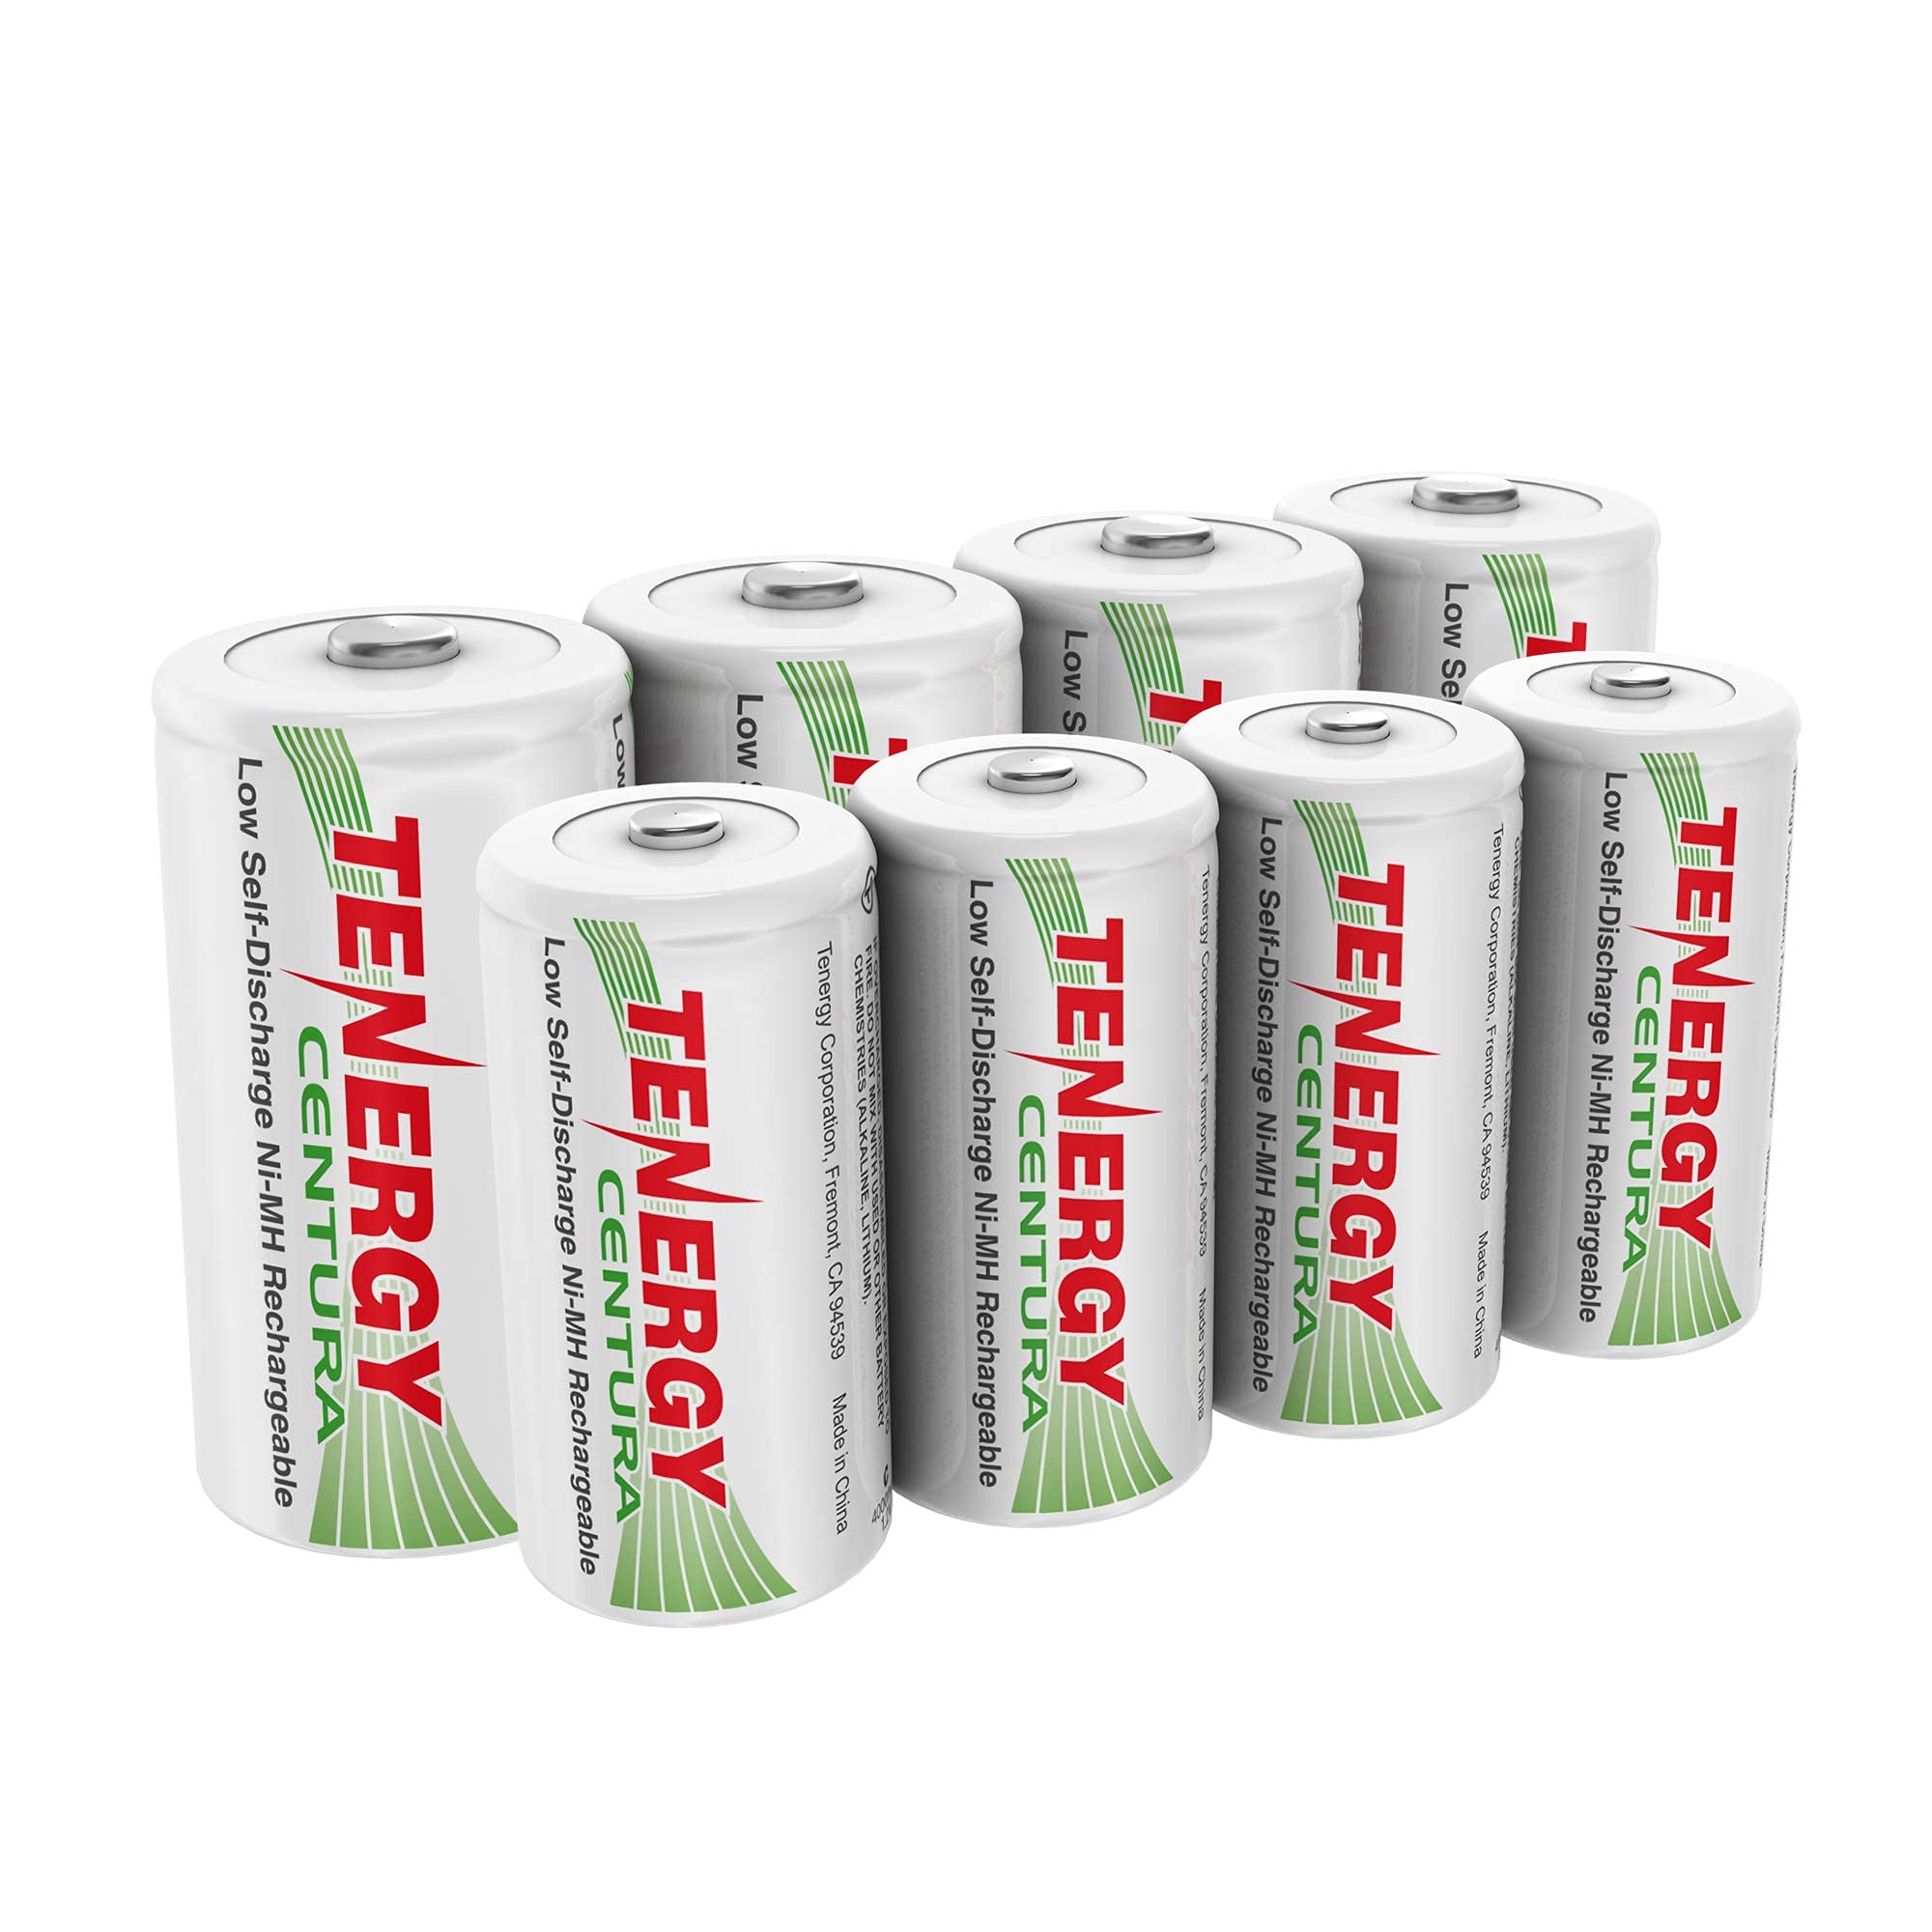 Tenergy Centura Low Self Discharge 8 Pack NiMH Rechargeable Battery Combo, Includes 4xC 4xD Rechargeable Batteries,